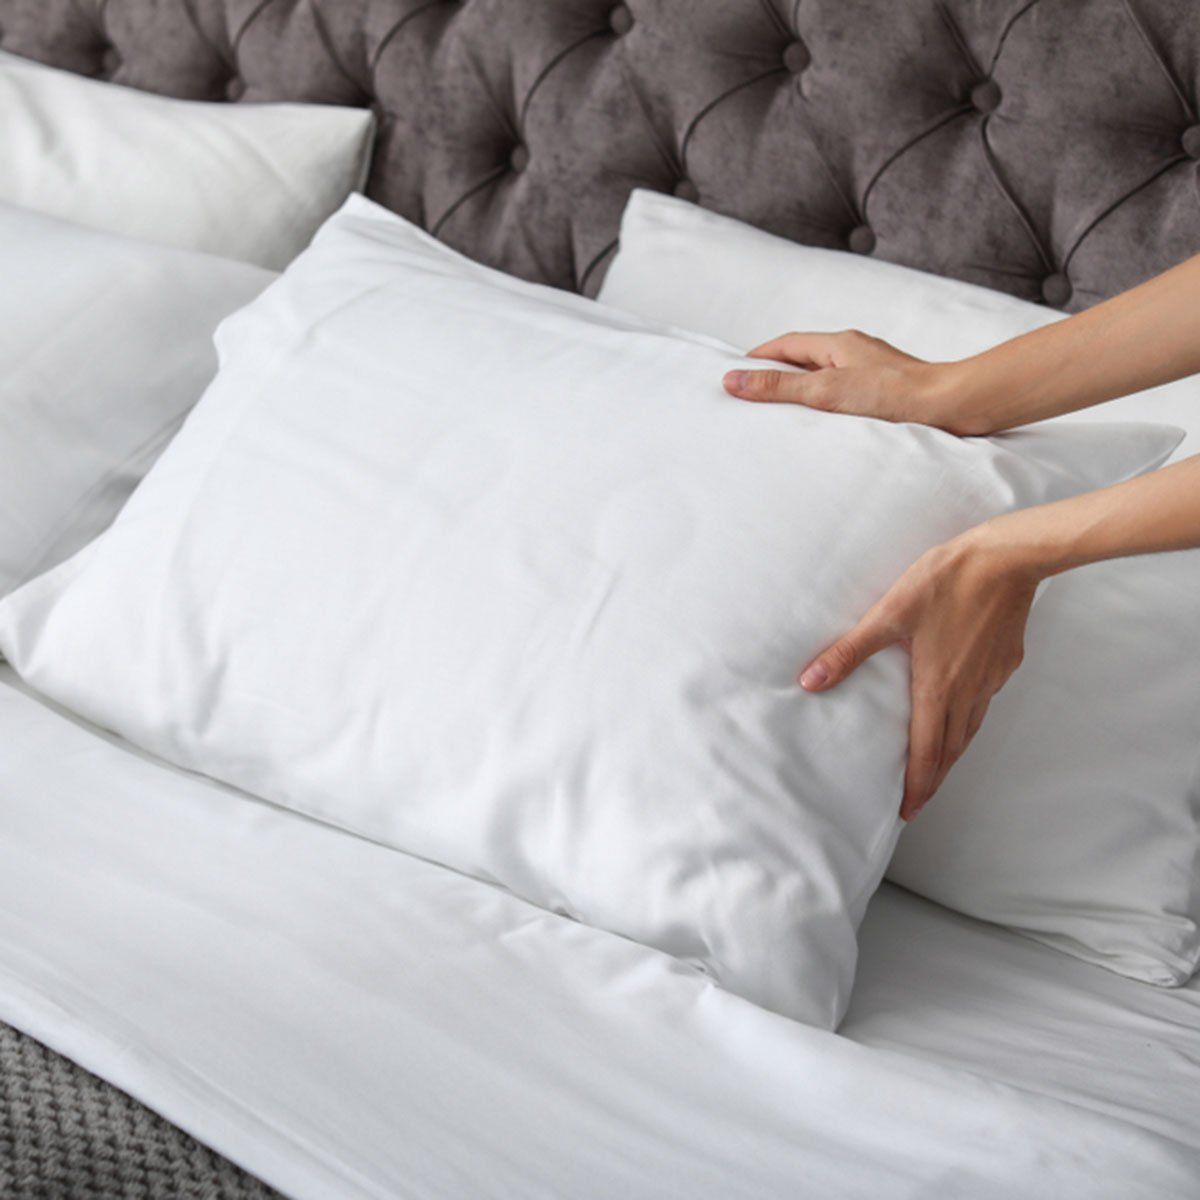 How Often Should I Change My Pillow? What Experts Advise